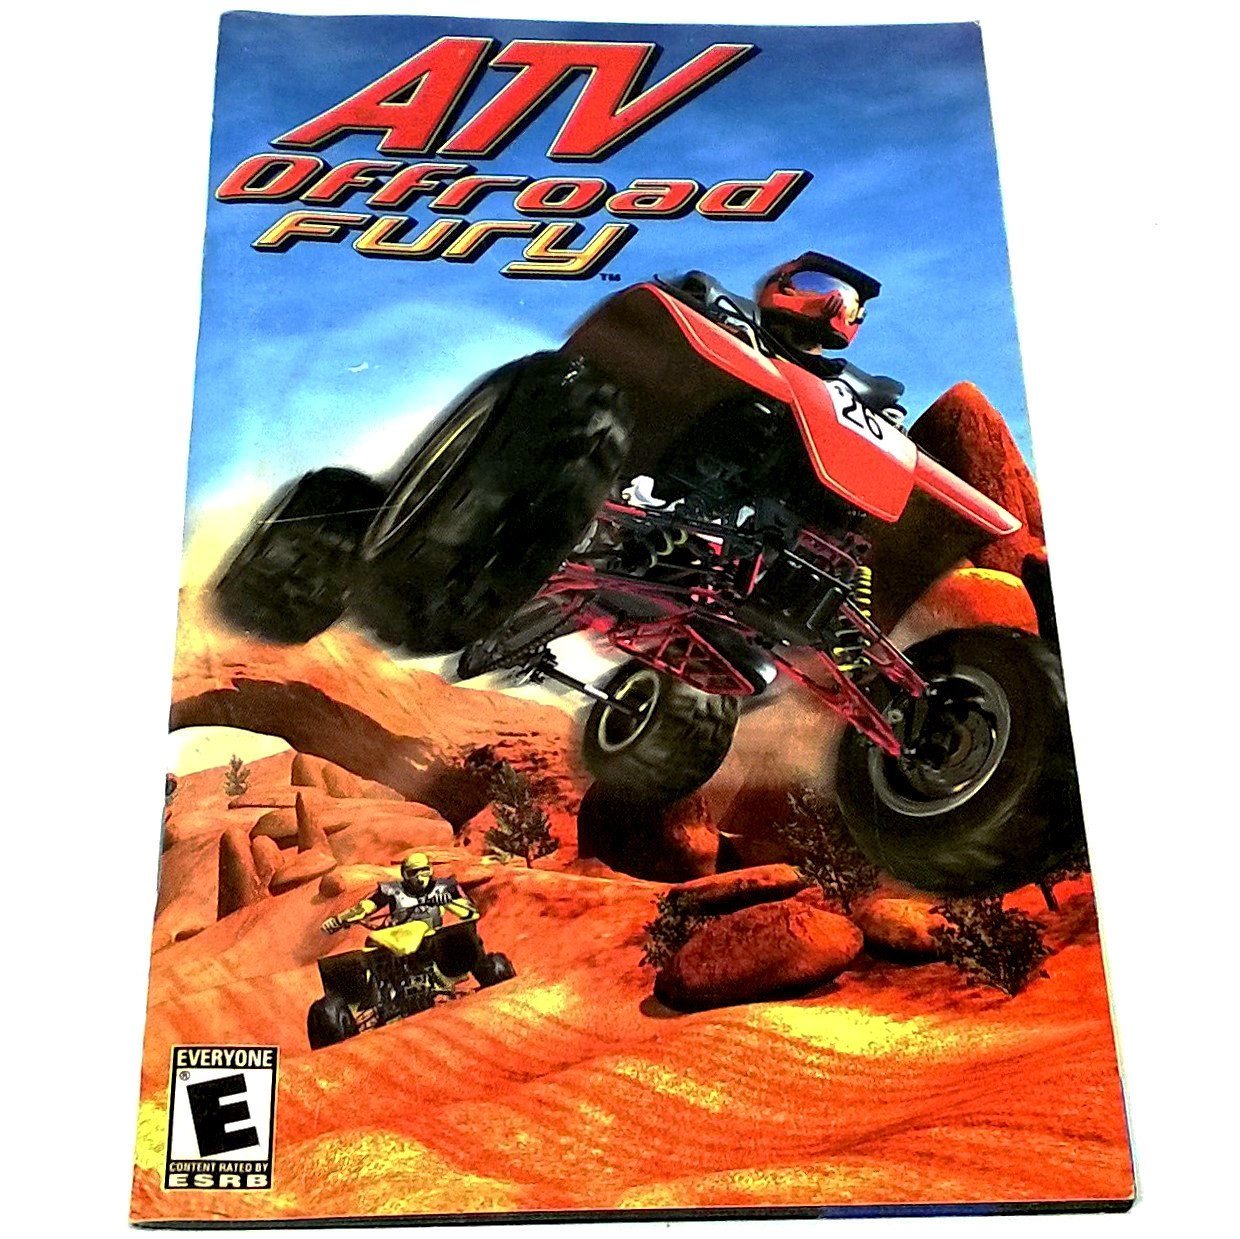 ATV Offroad Fury (Greatest Hits Edition) for PlayStation 2 - Front of manual